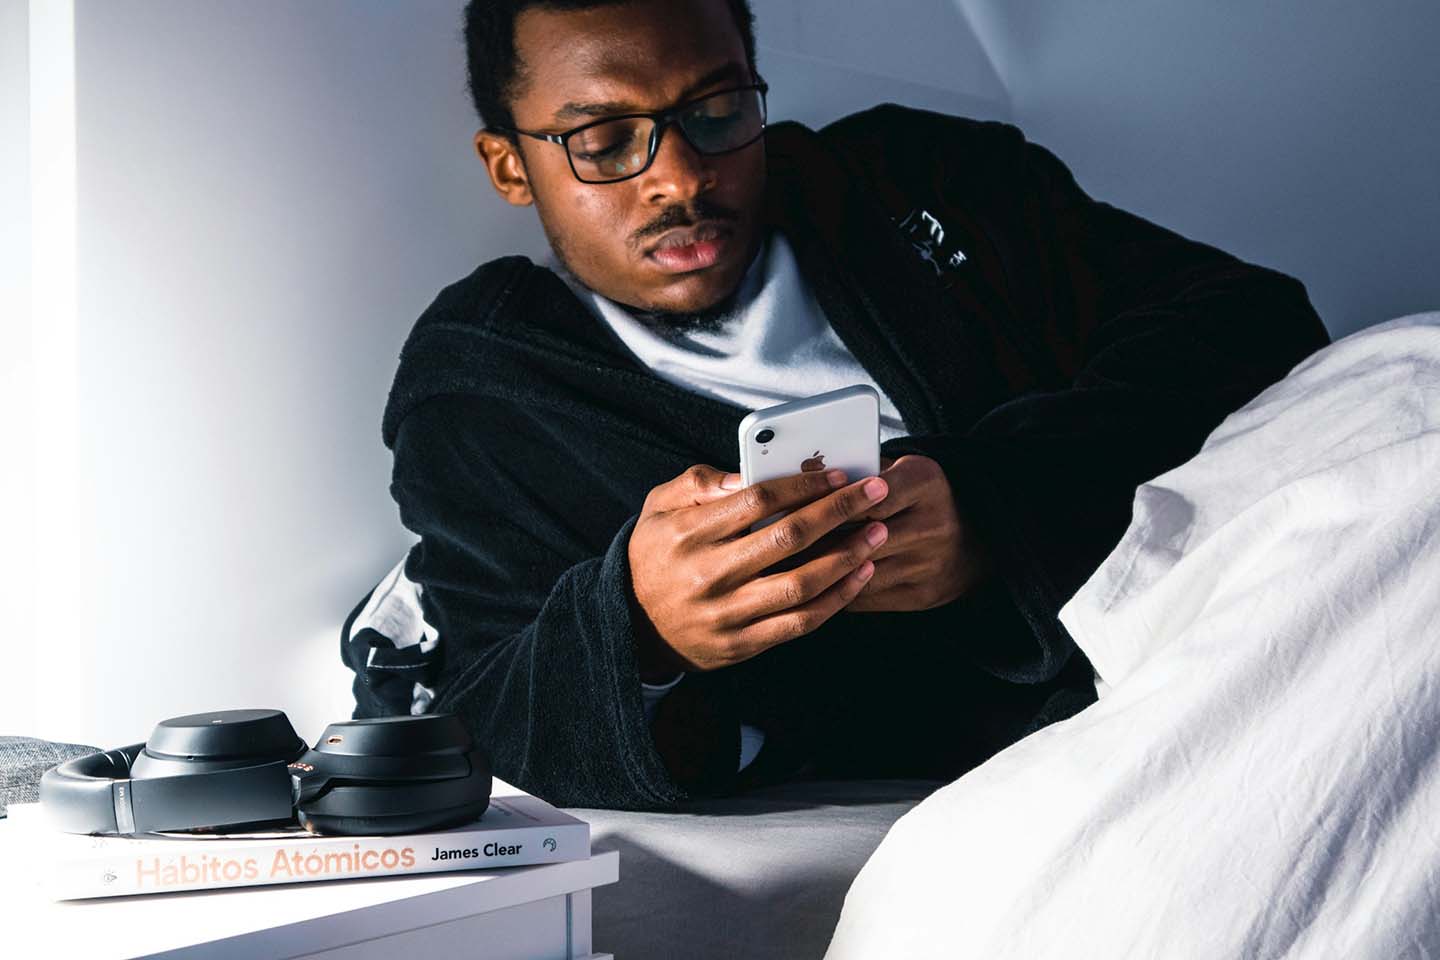 a man looking a his smartphone while on bed